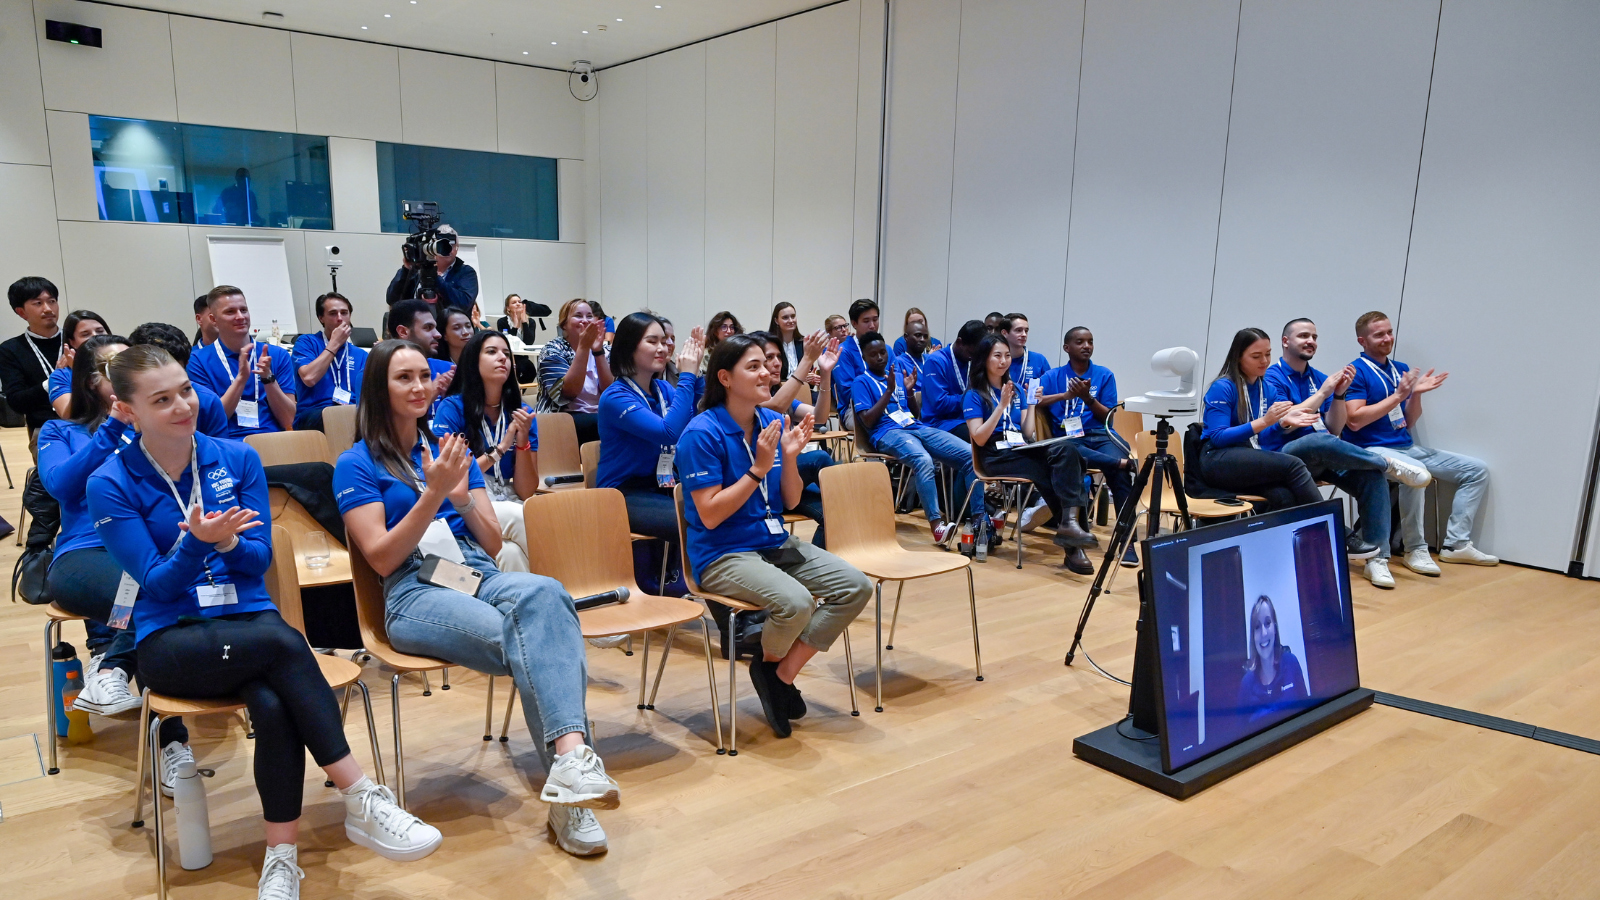 Photo: IOC Young Leaders gathered at the IOC Youth Summit at Olympic House in Lausanne